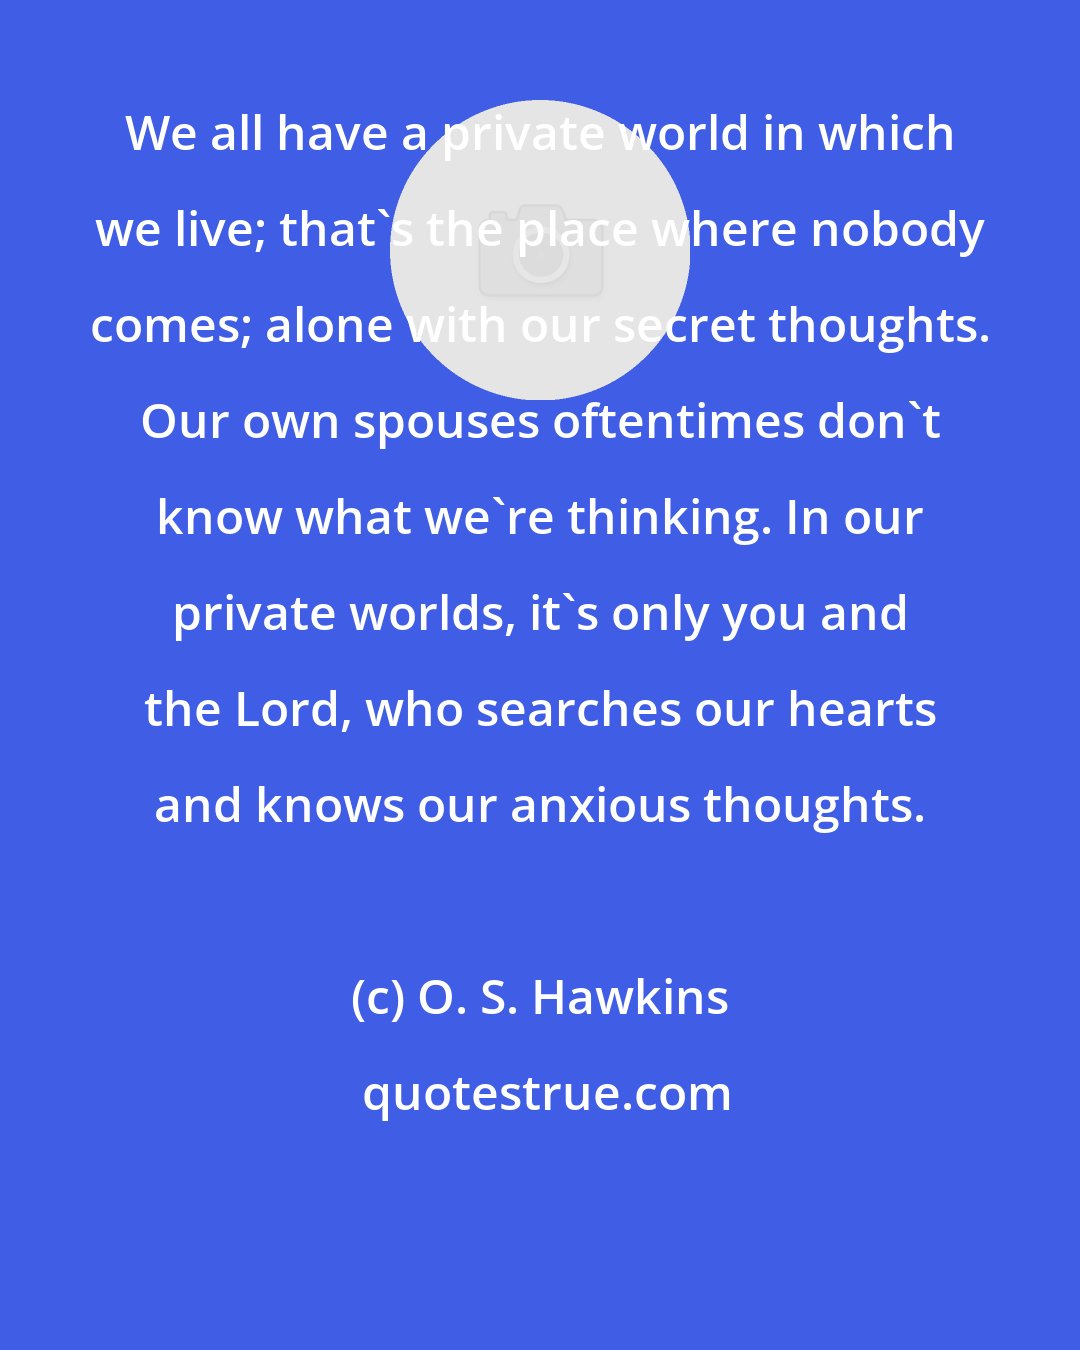 O. S. Hawkins: We all have a private world in which we live; that's the place where nobody comes; alone with our secret thoughts. Our own spouses oftentimes don't know what we're thinking. In our private worlds, it's only you and the Lord, who searches our hearts and knows our anxious thoughts.